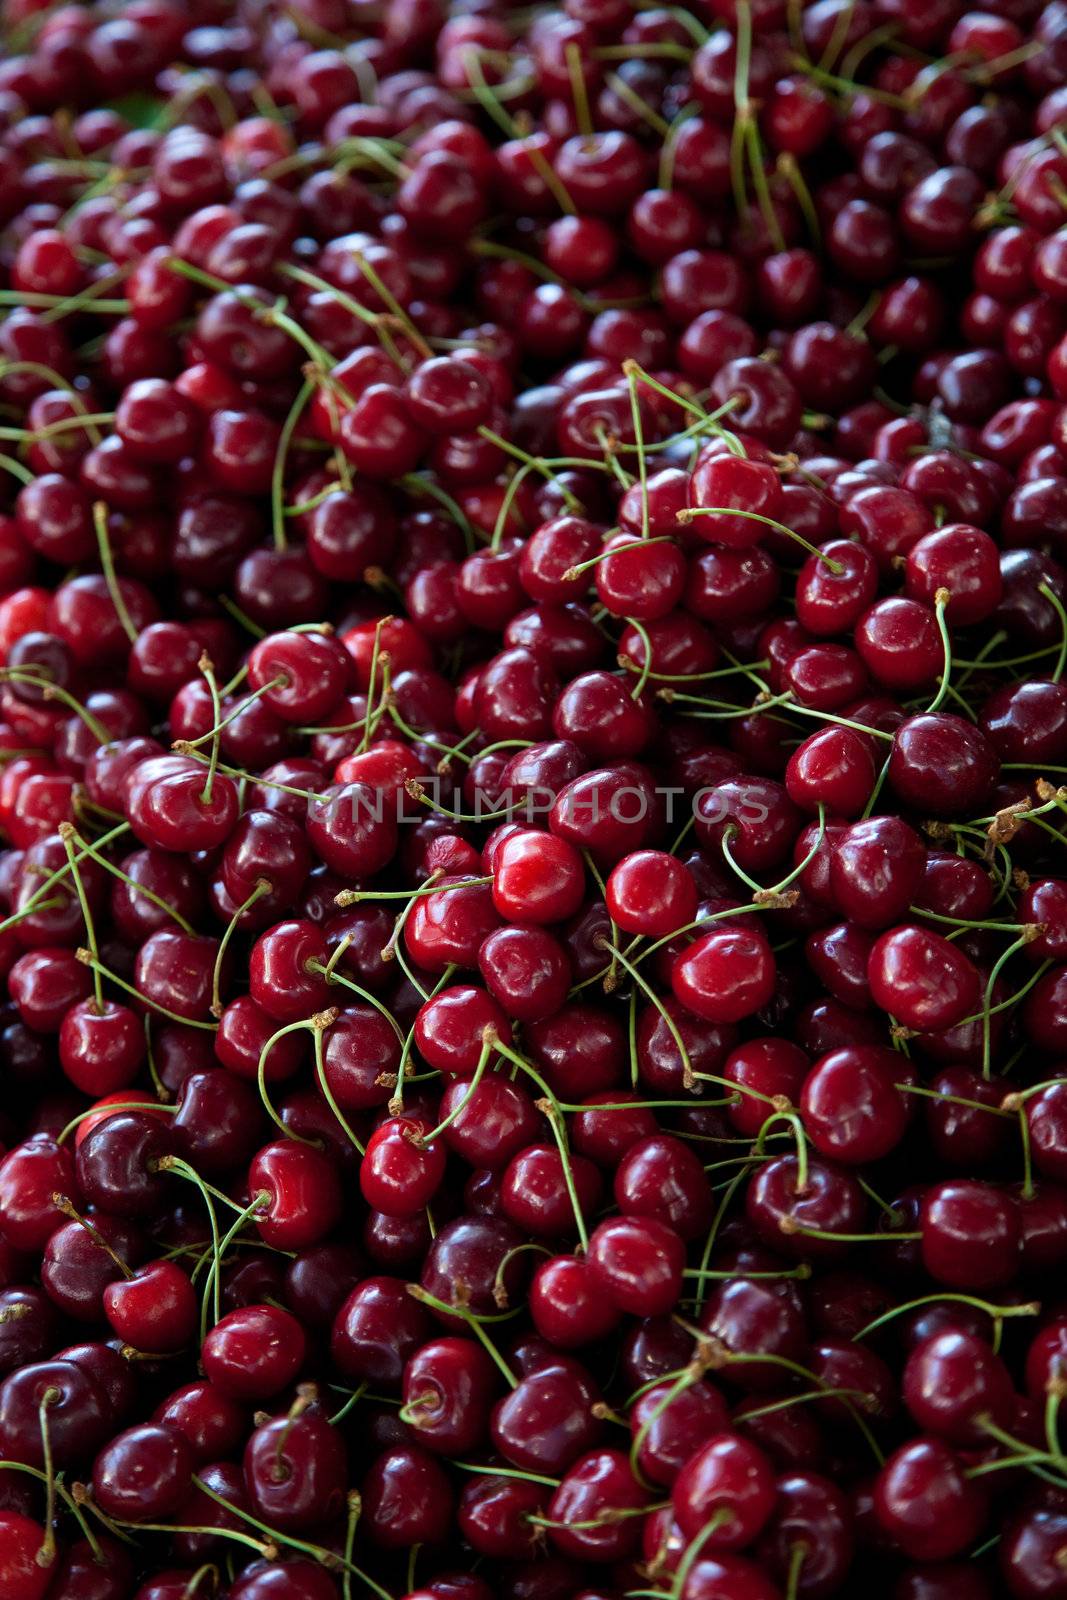 Pile of red cherries waiting to be bought